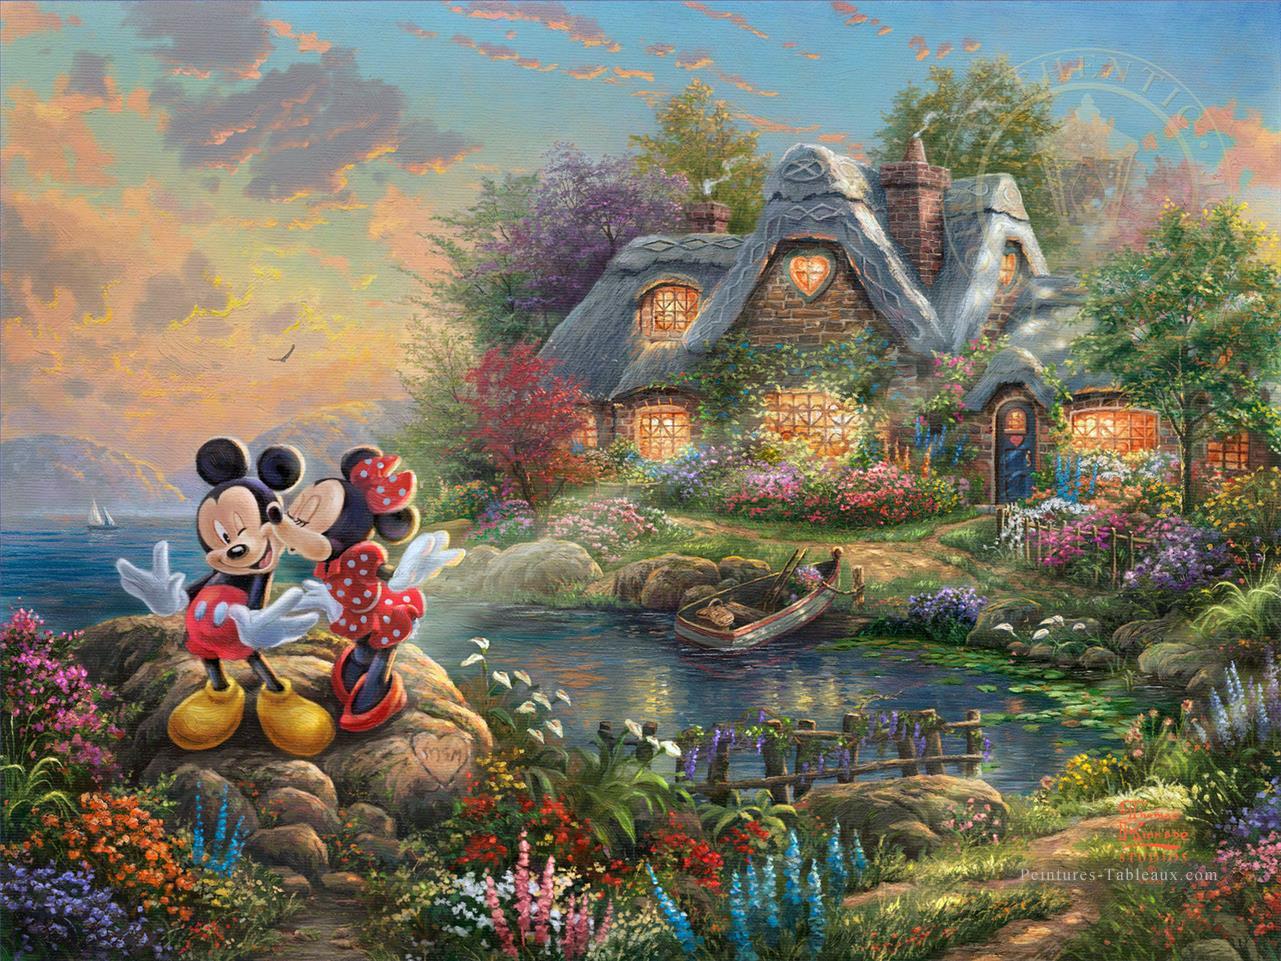 Mickey and Minnie Sweetheart Dope TK Disney Peintures à l'huile